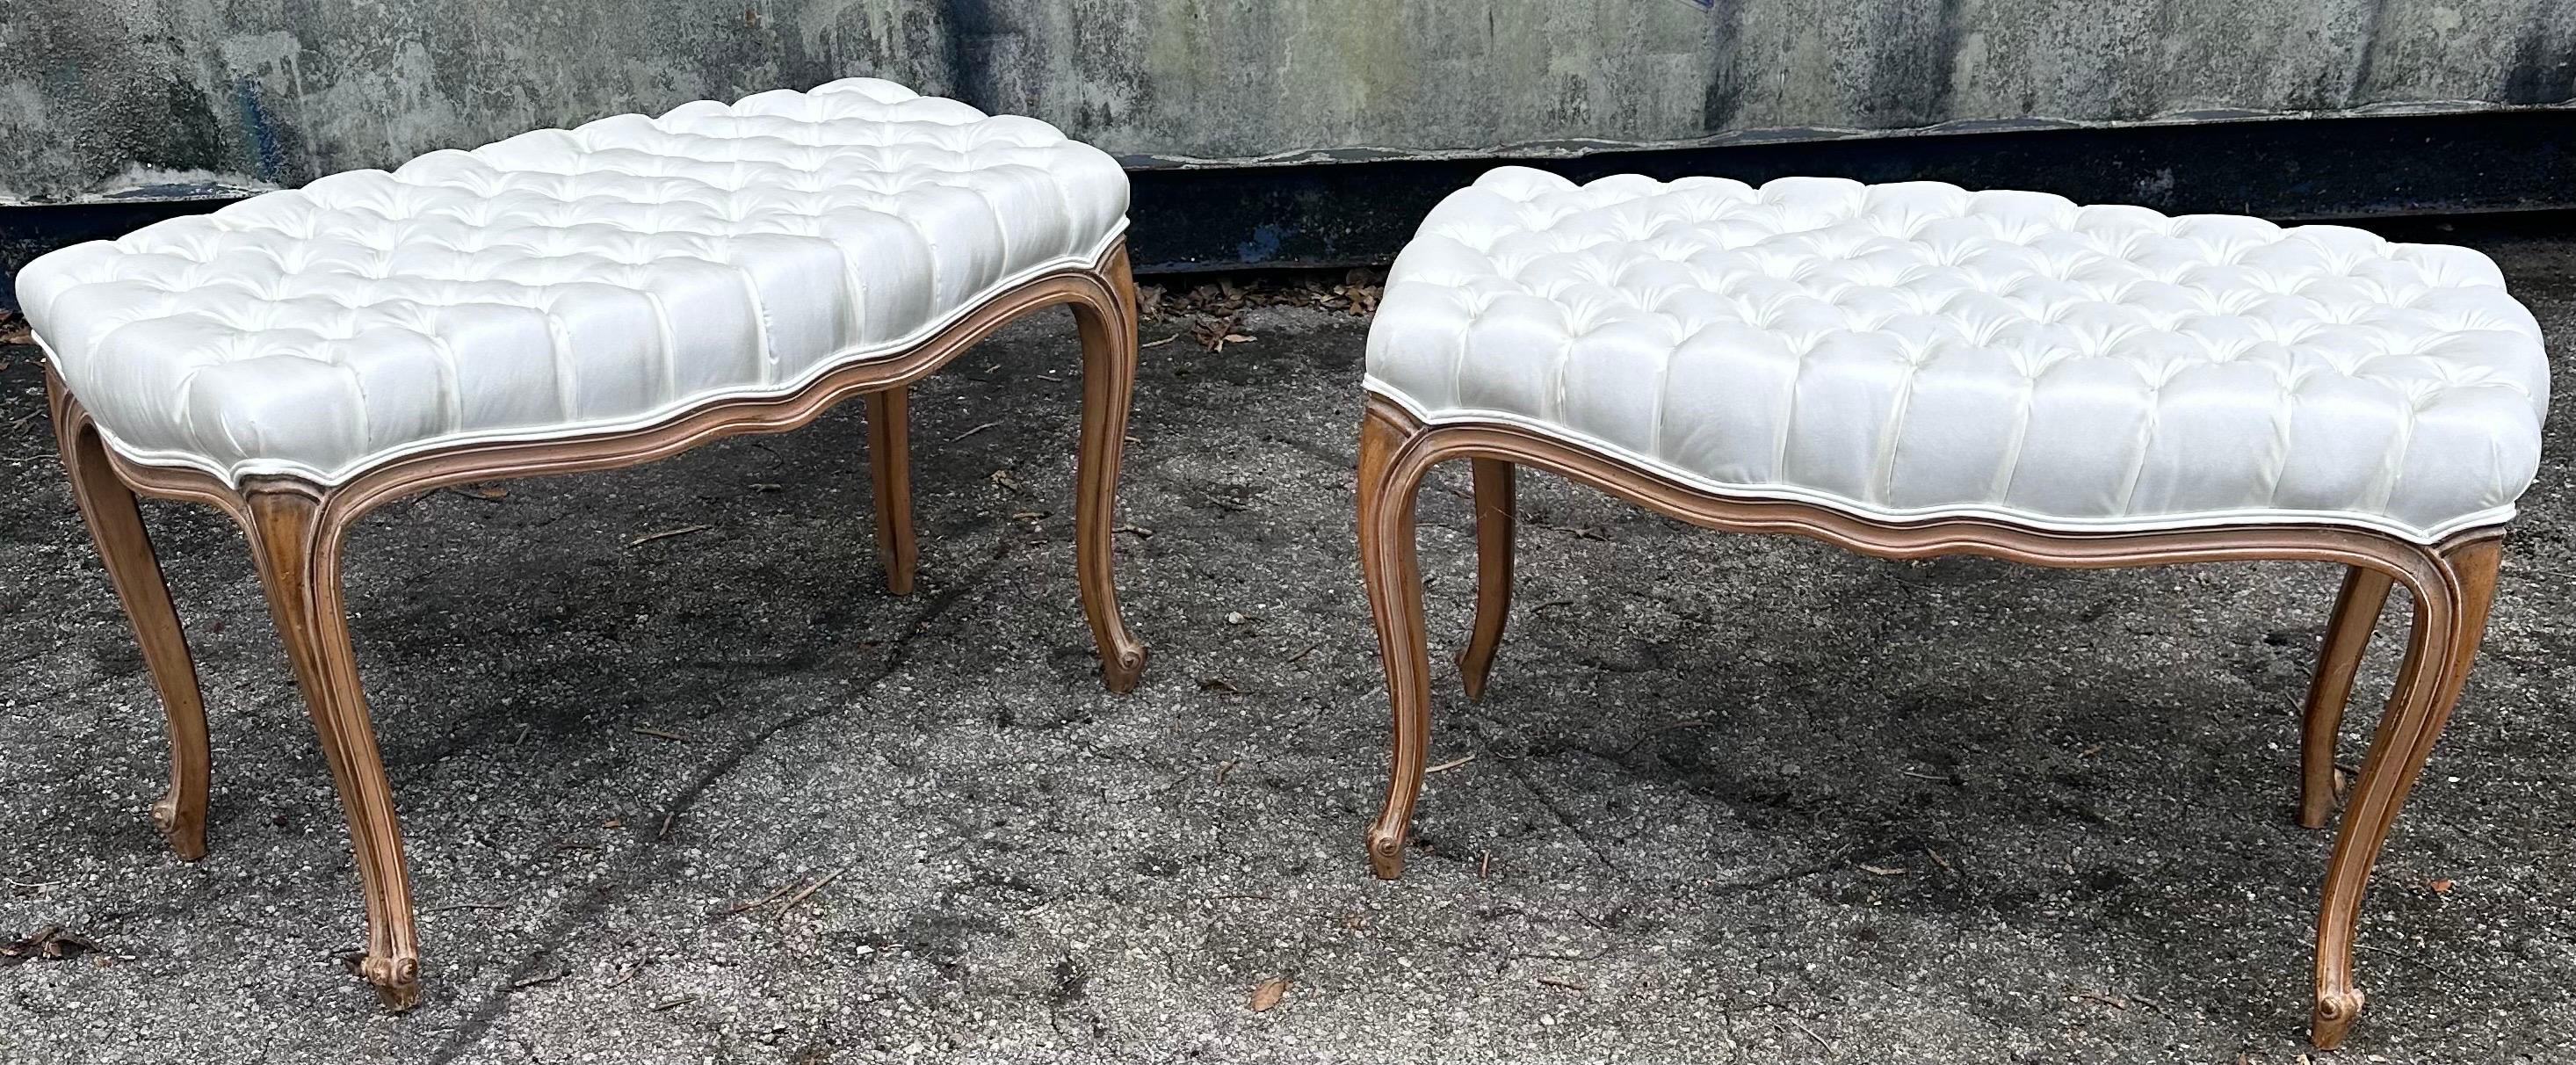 Pair of 1960’s tufted Italian Benches.
Walnut bleach wood and fabric.
Newly reupholstered .